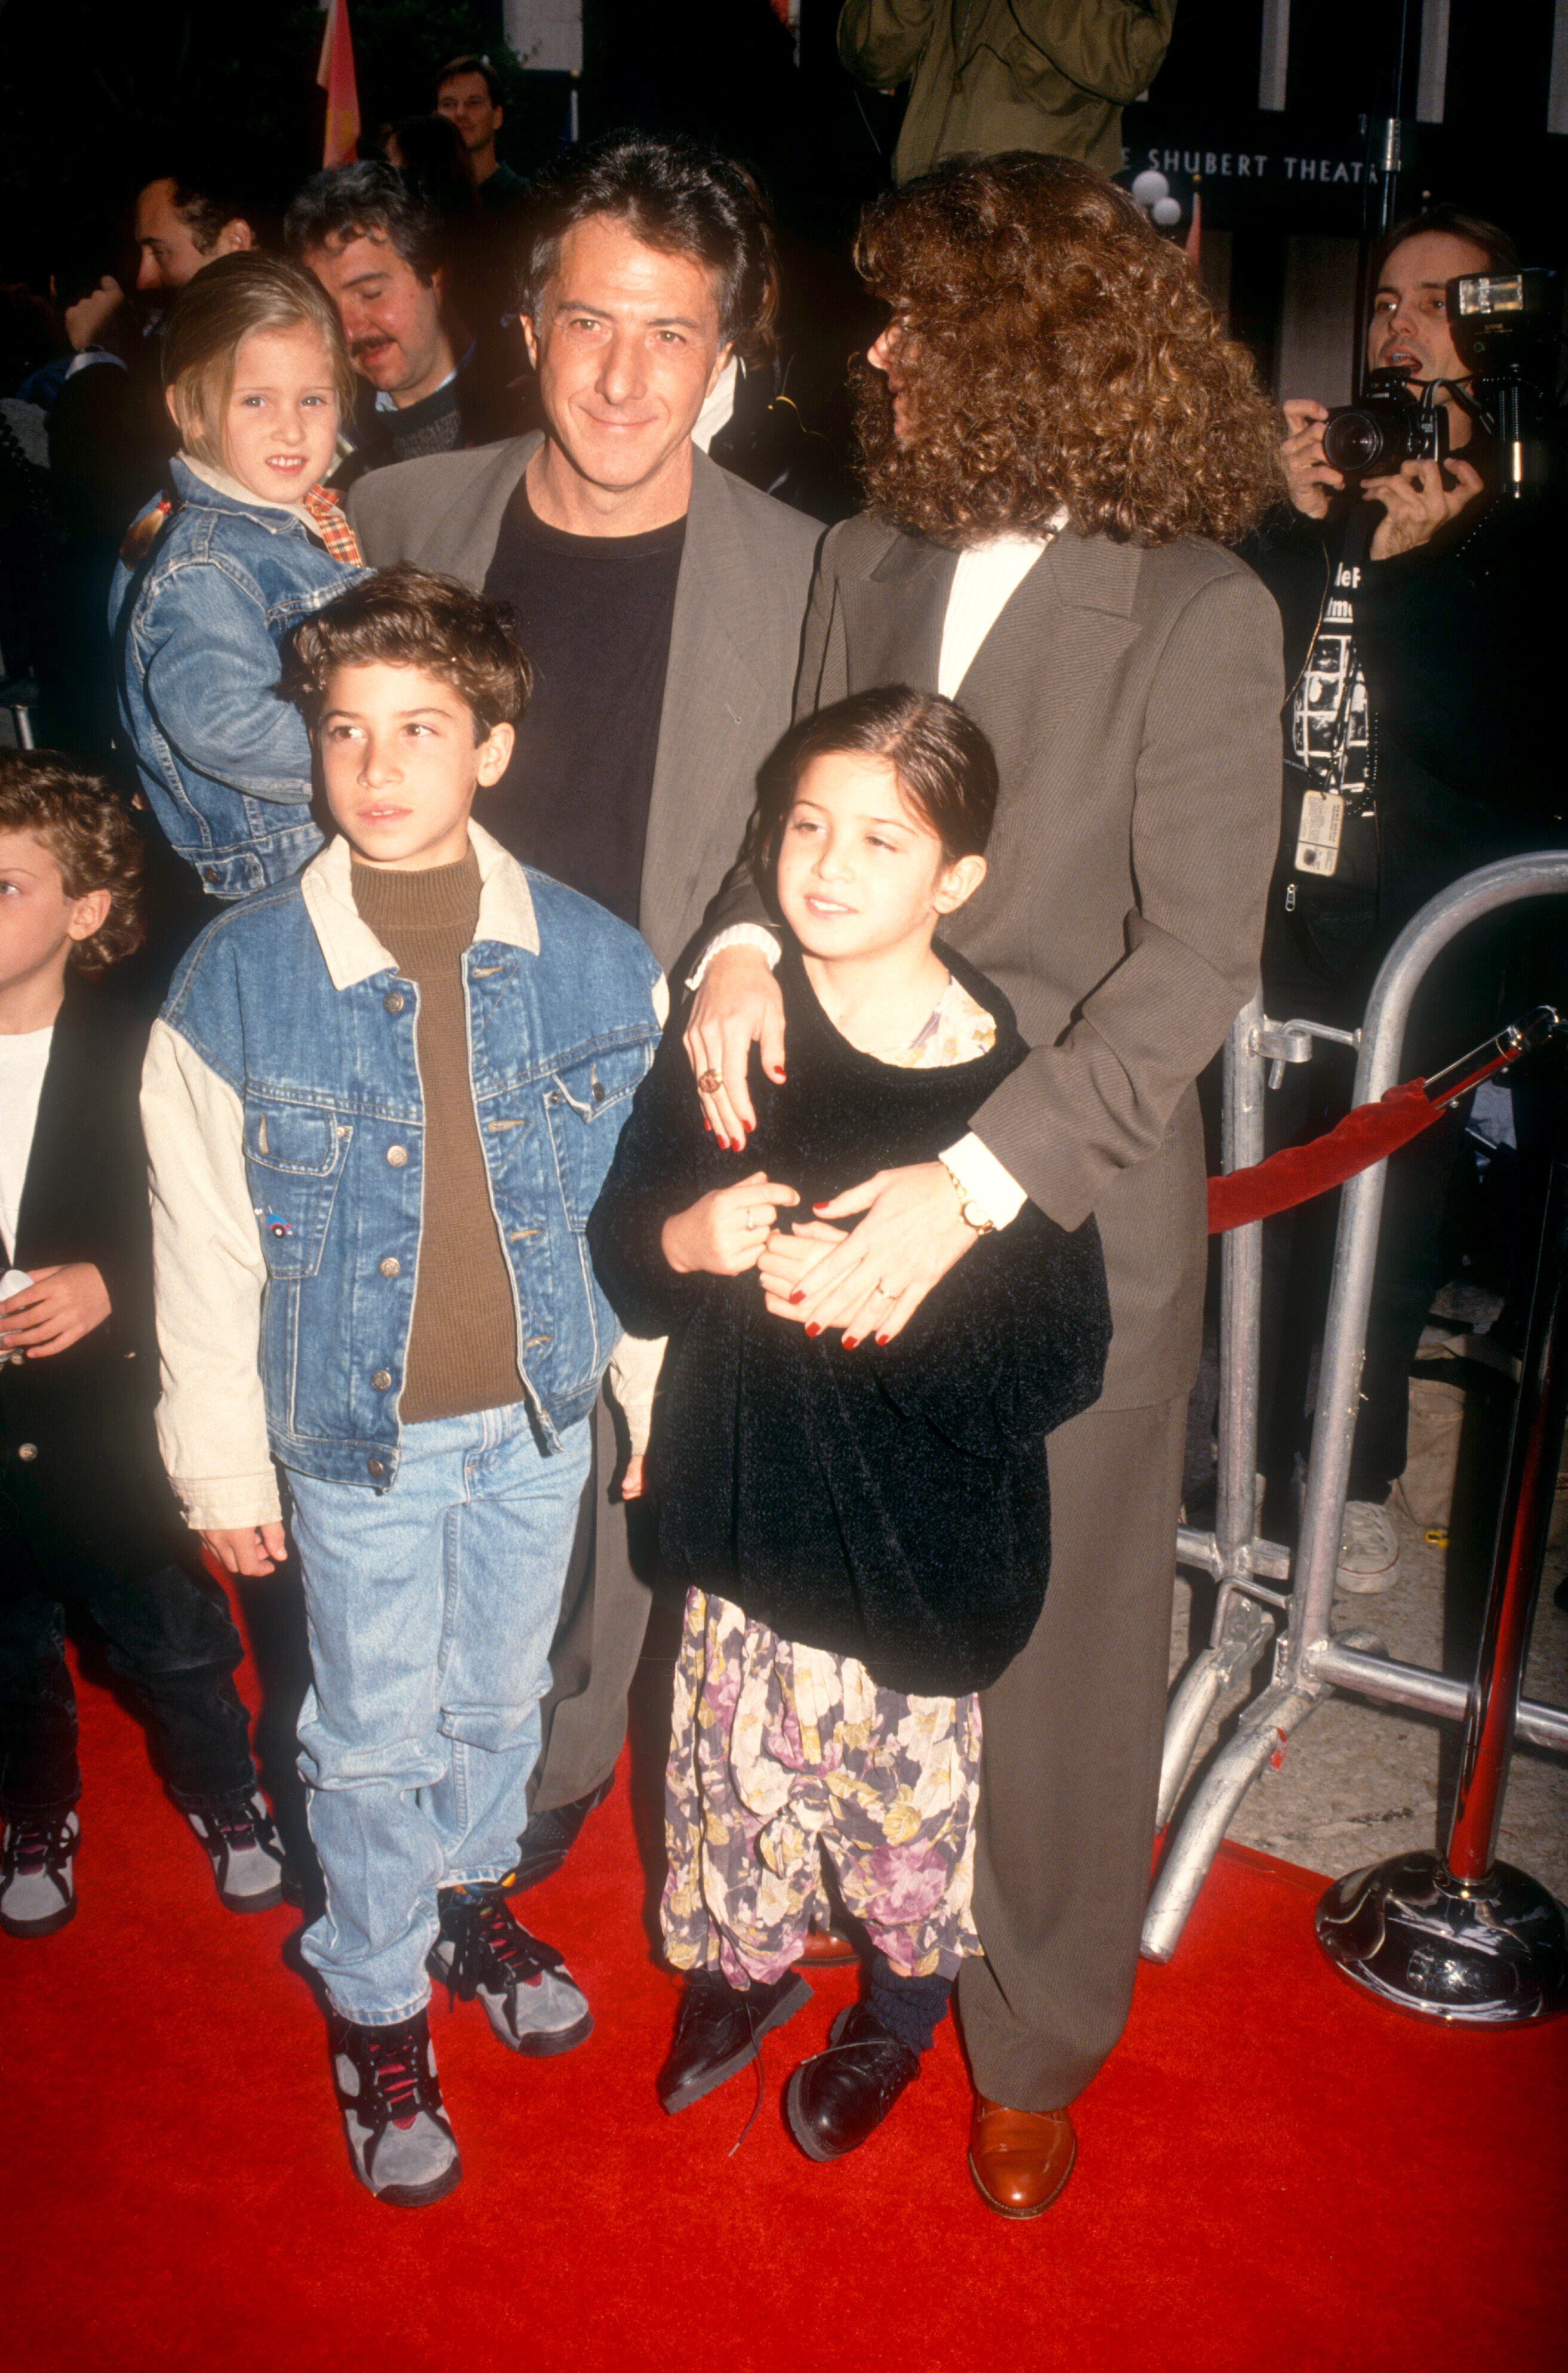 The actor, the woman, and their children at the "Hook" premiere in Century City, California on December 8, 1991. | Source: Getty Images